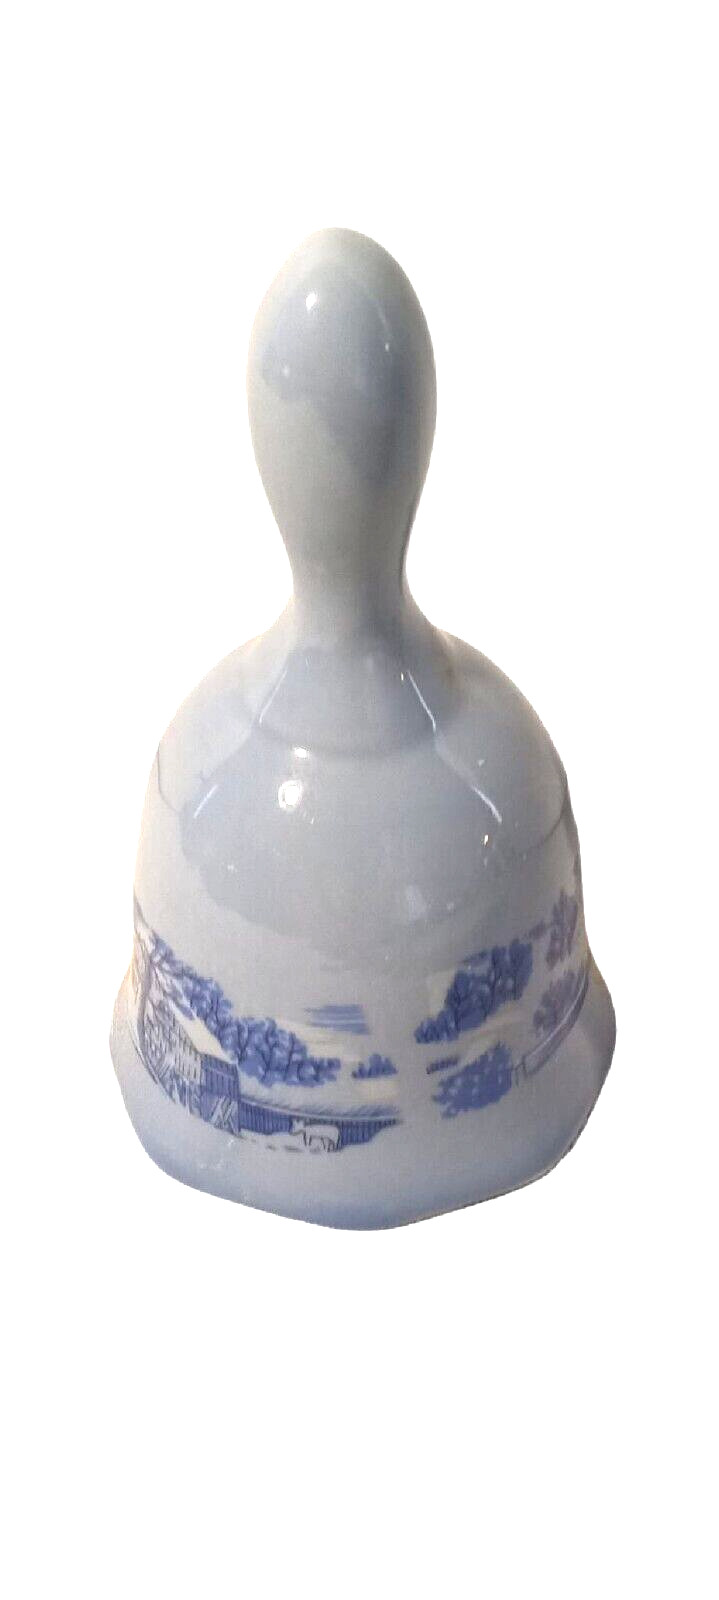 VINTAGE HAND PAINTED BLUE PORCELAIN BELL BLUE WITH COUNTRY WINTER SCENE